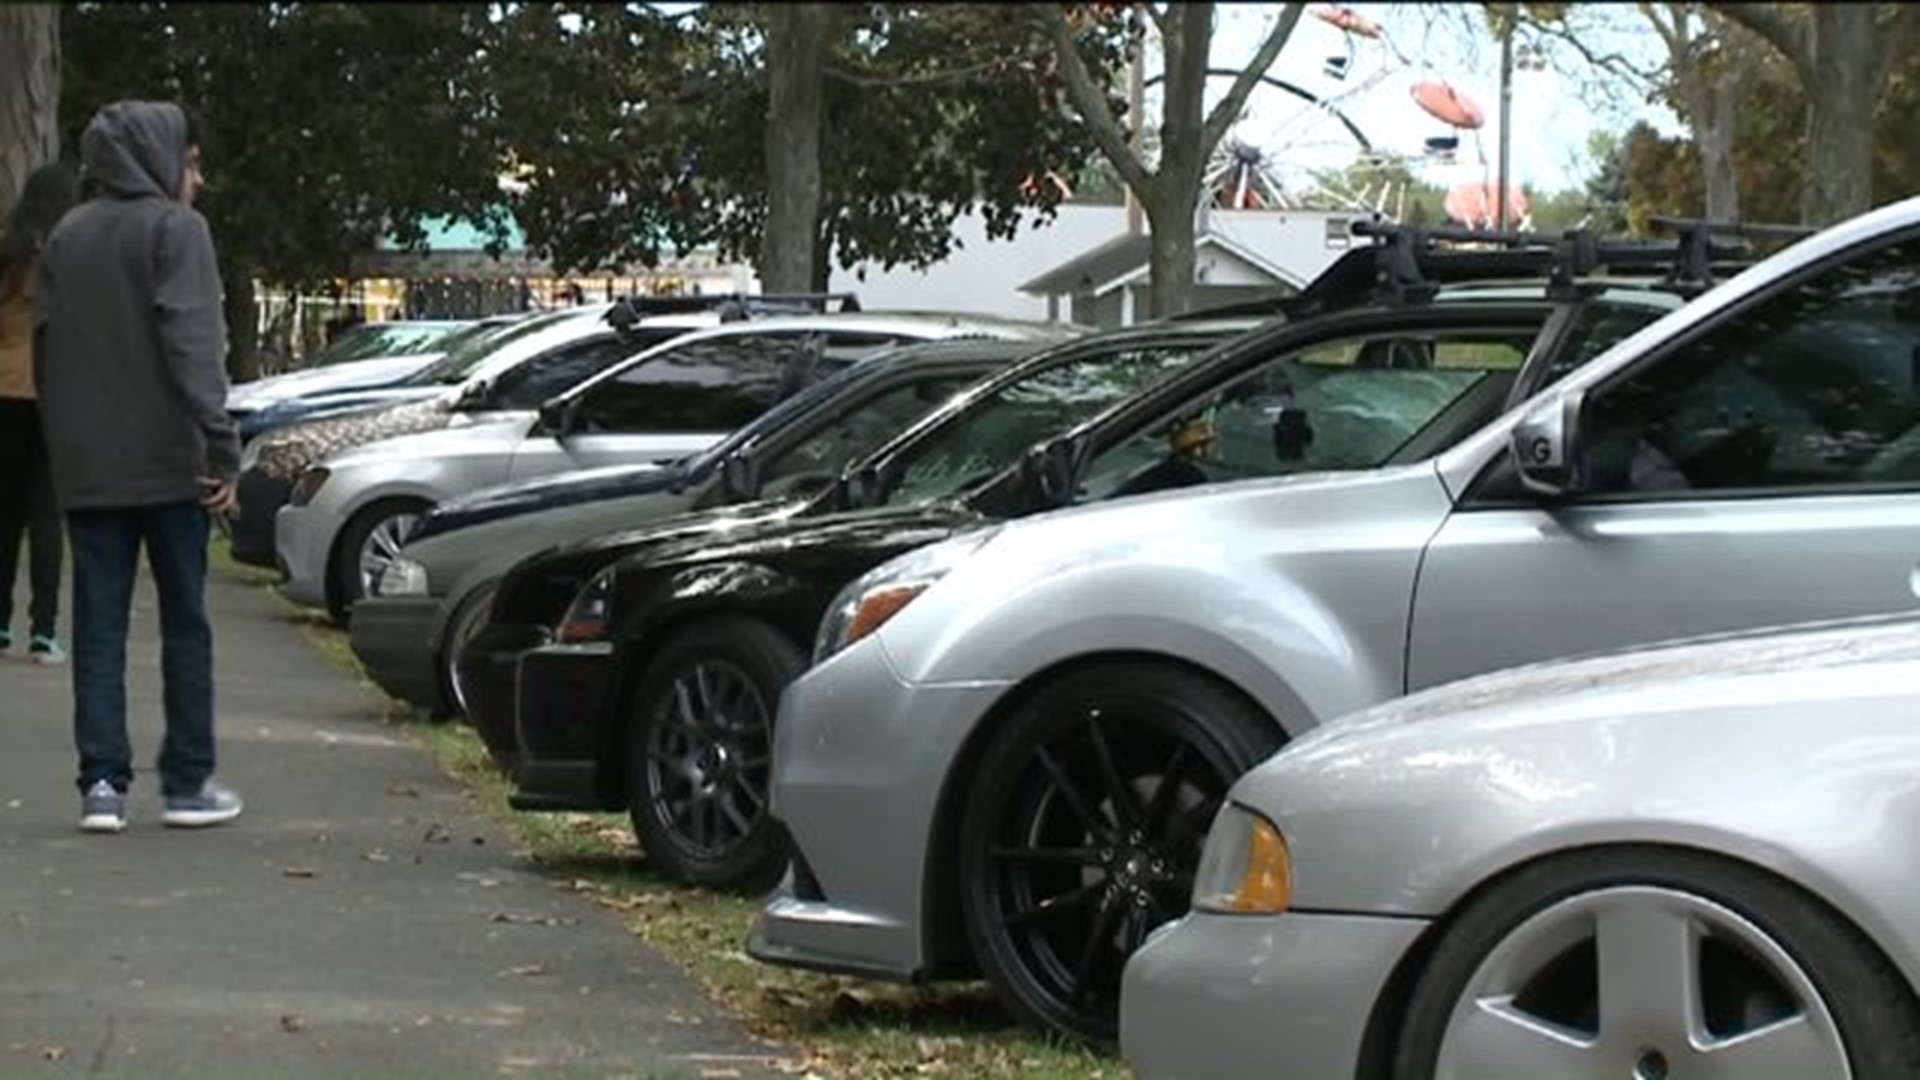 Cars on Display in the Poconos